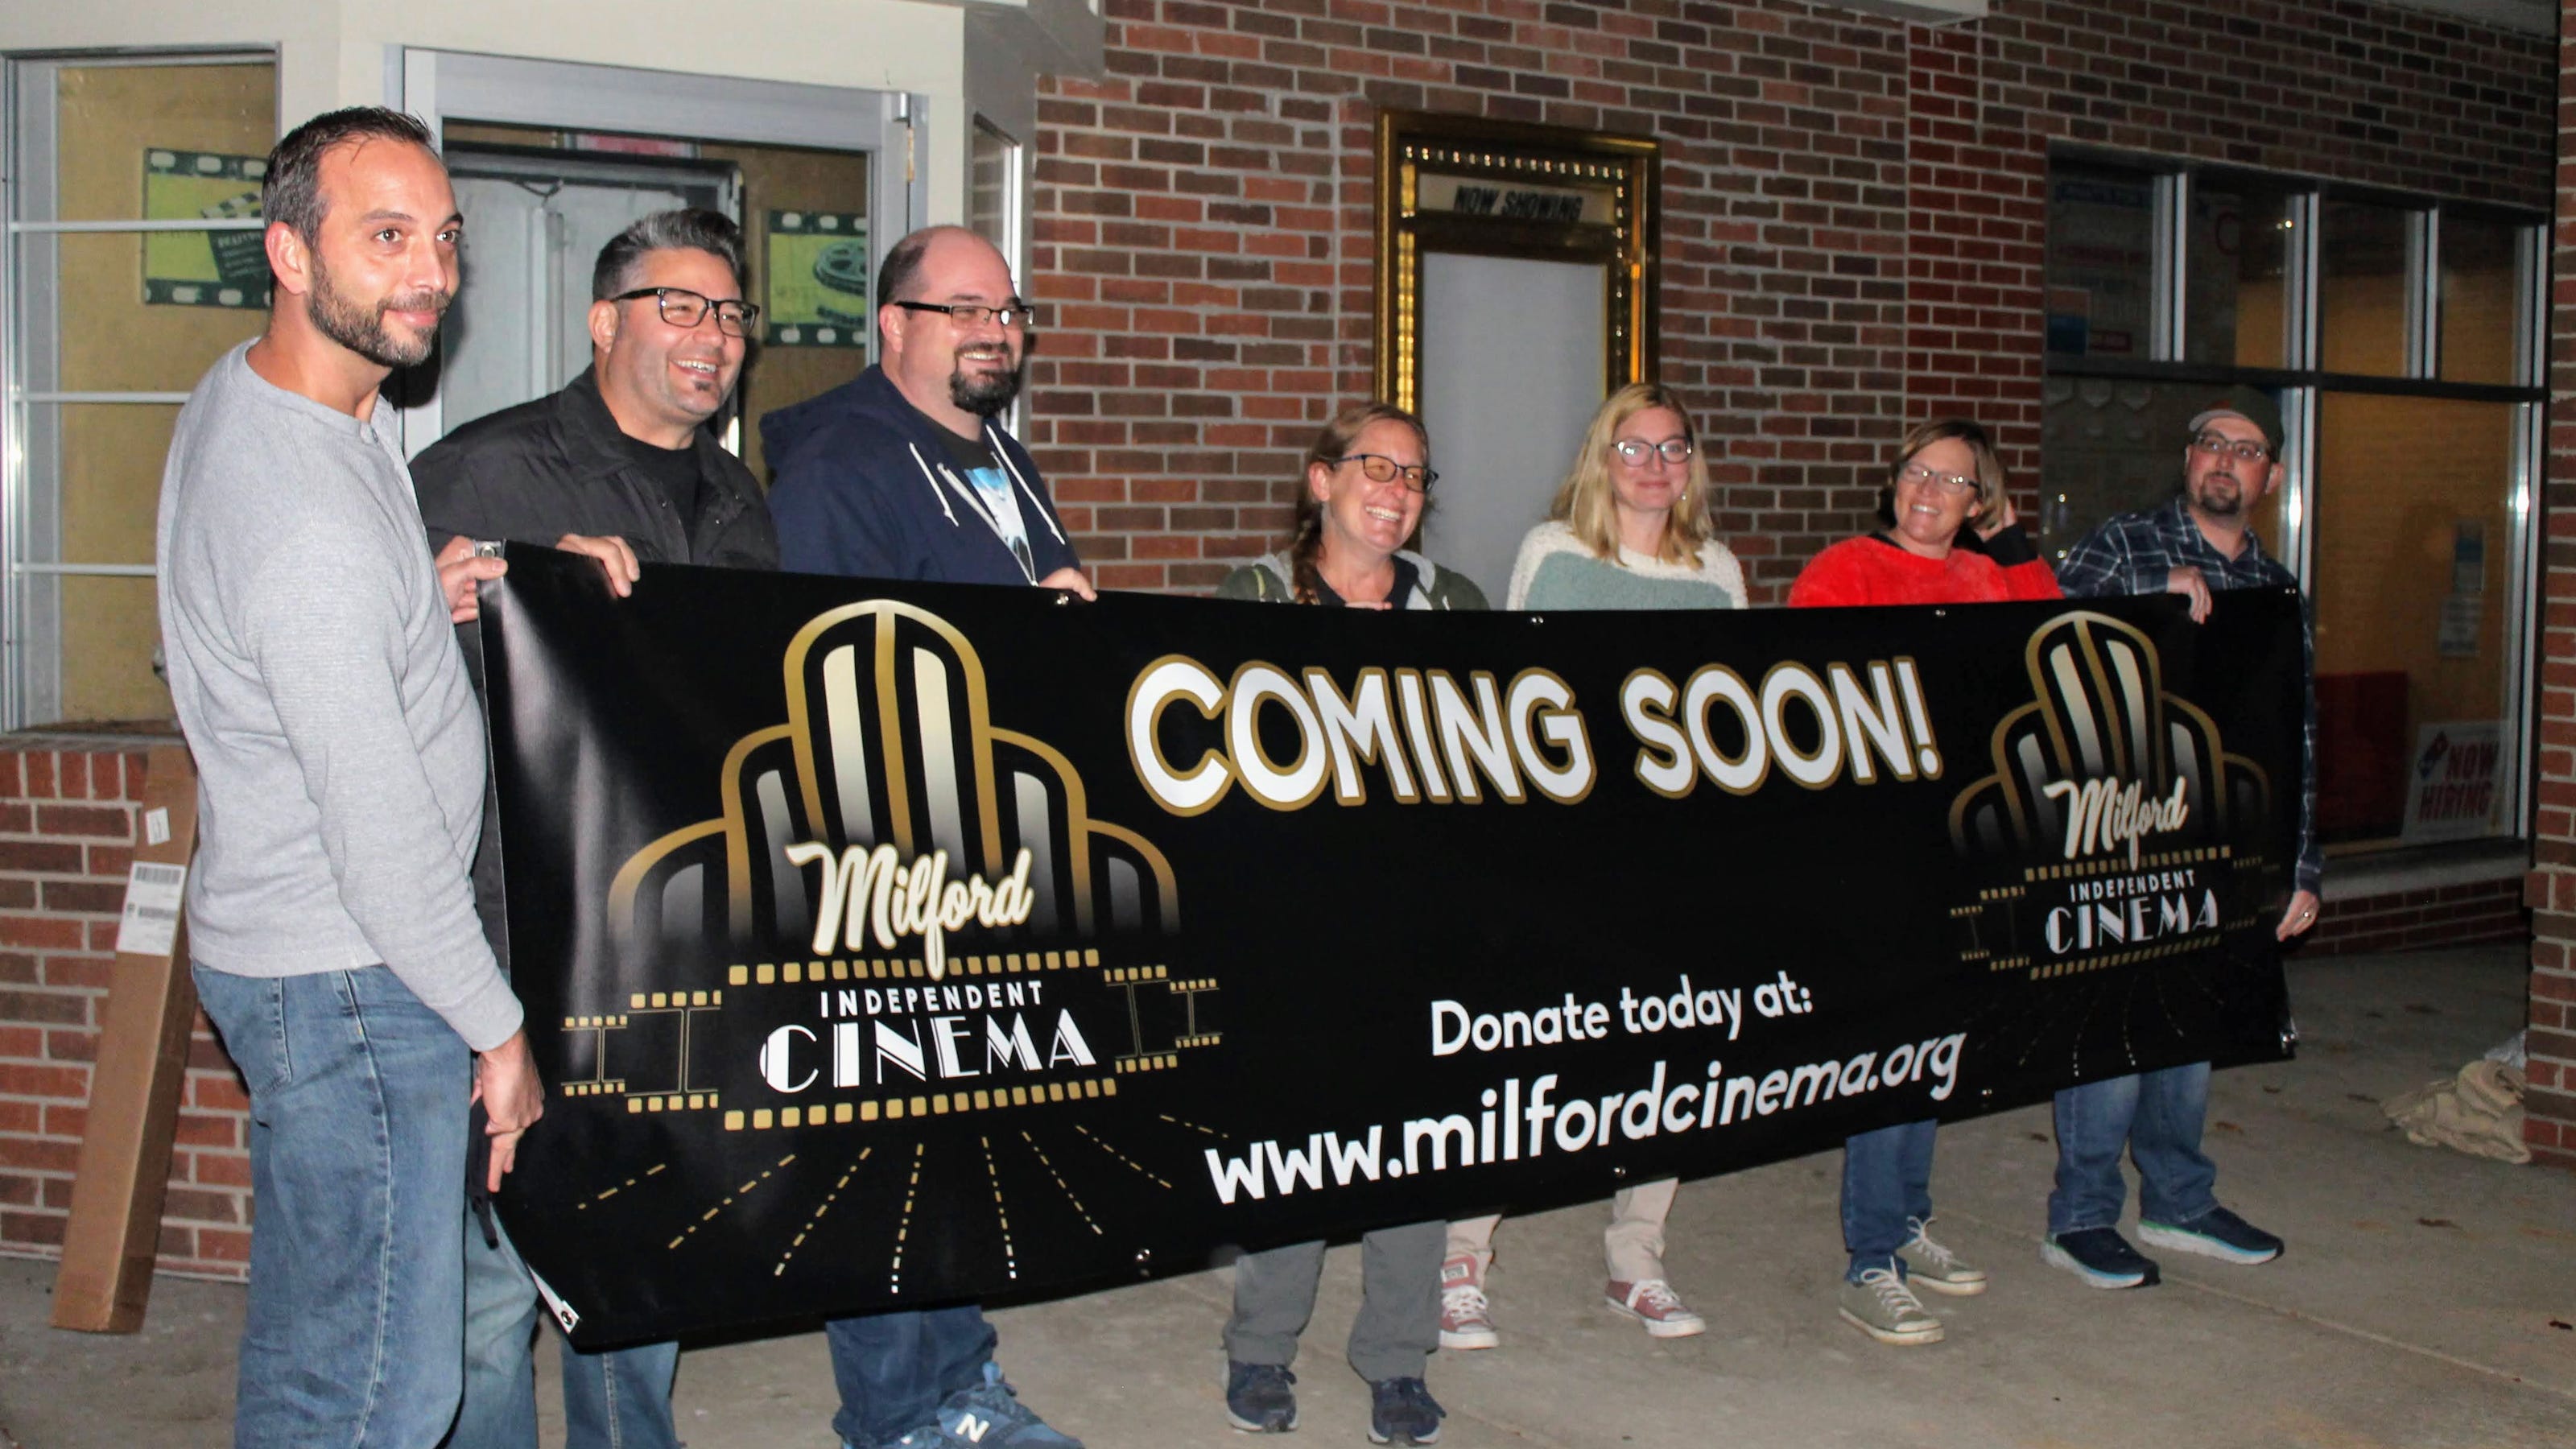 Nonprofit group hopes to bring movies back to the Milford Cinema